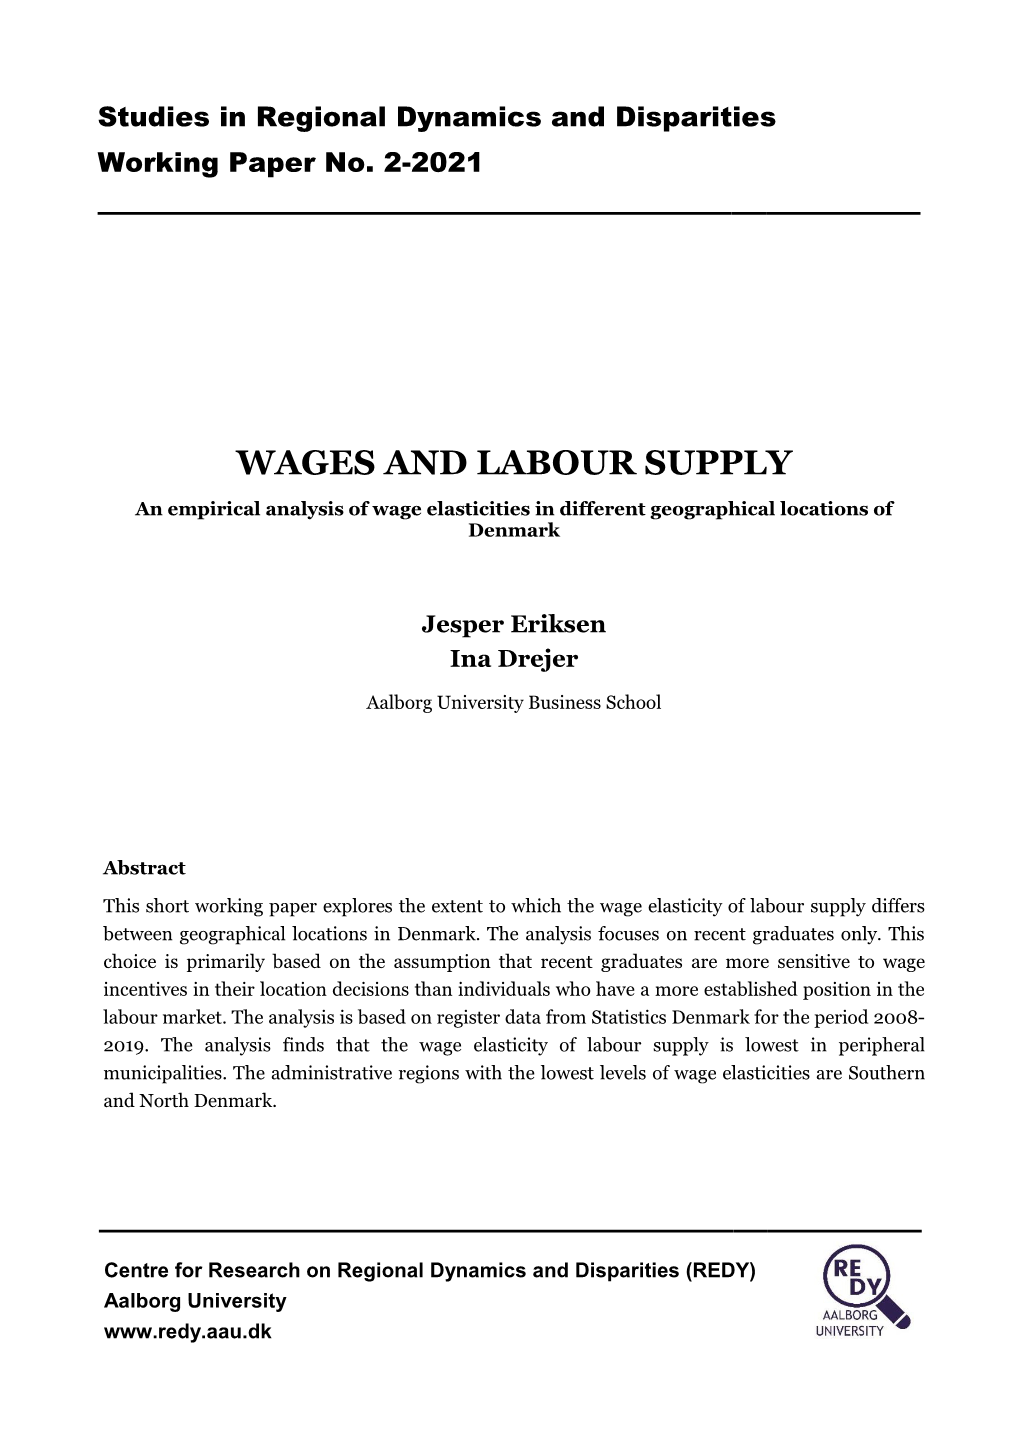 Wages and Labour Supply